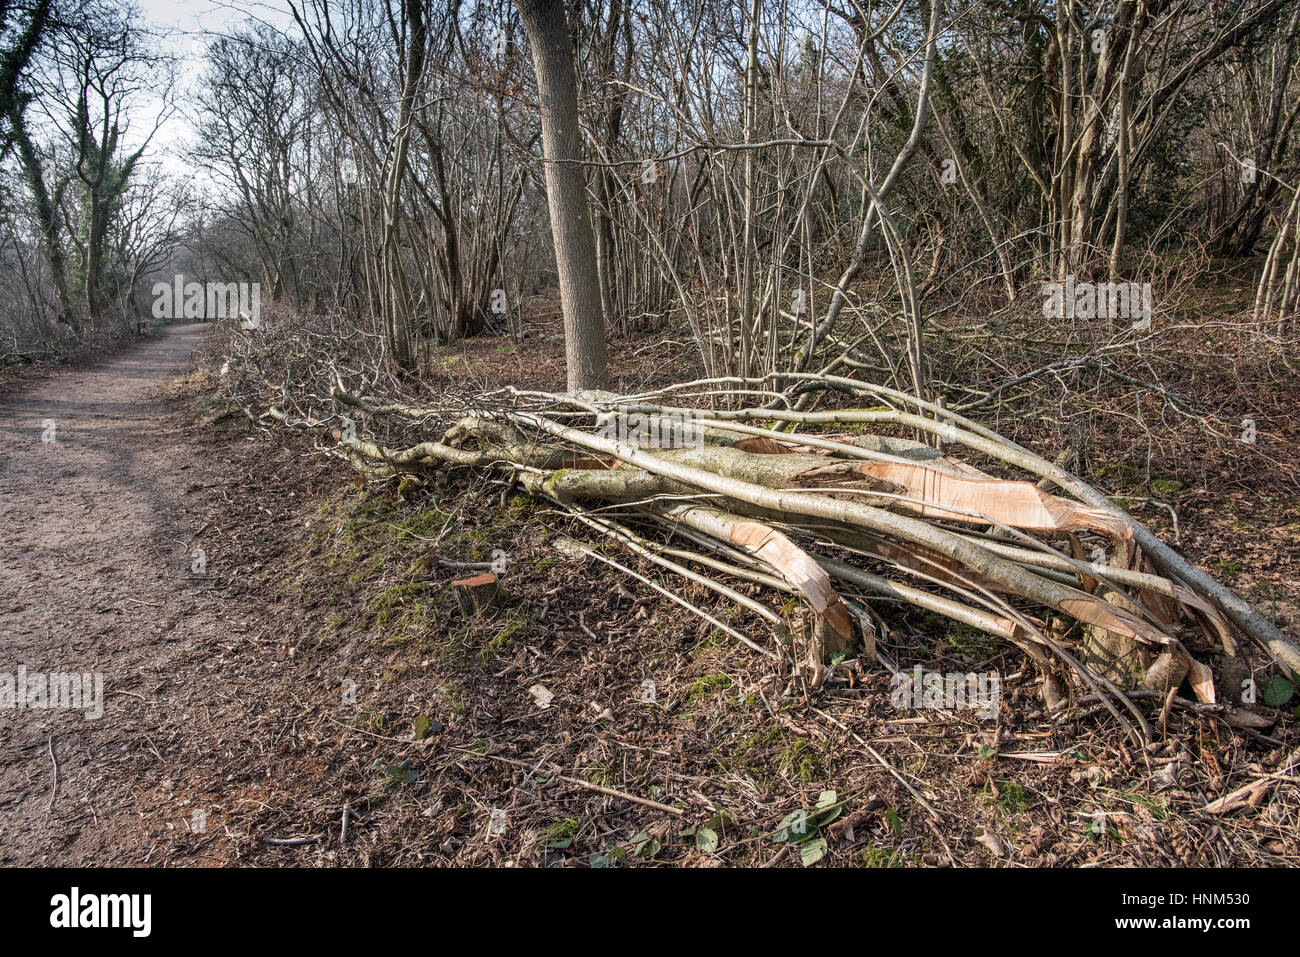 Hazel, Corylus avellana, hedge freshly layed in coppiced woodland, showing hedge laying technique and cut stems Stock Photo